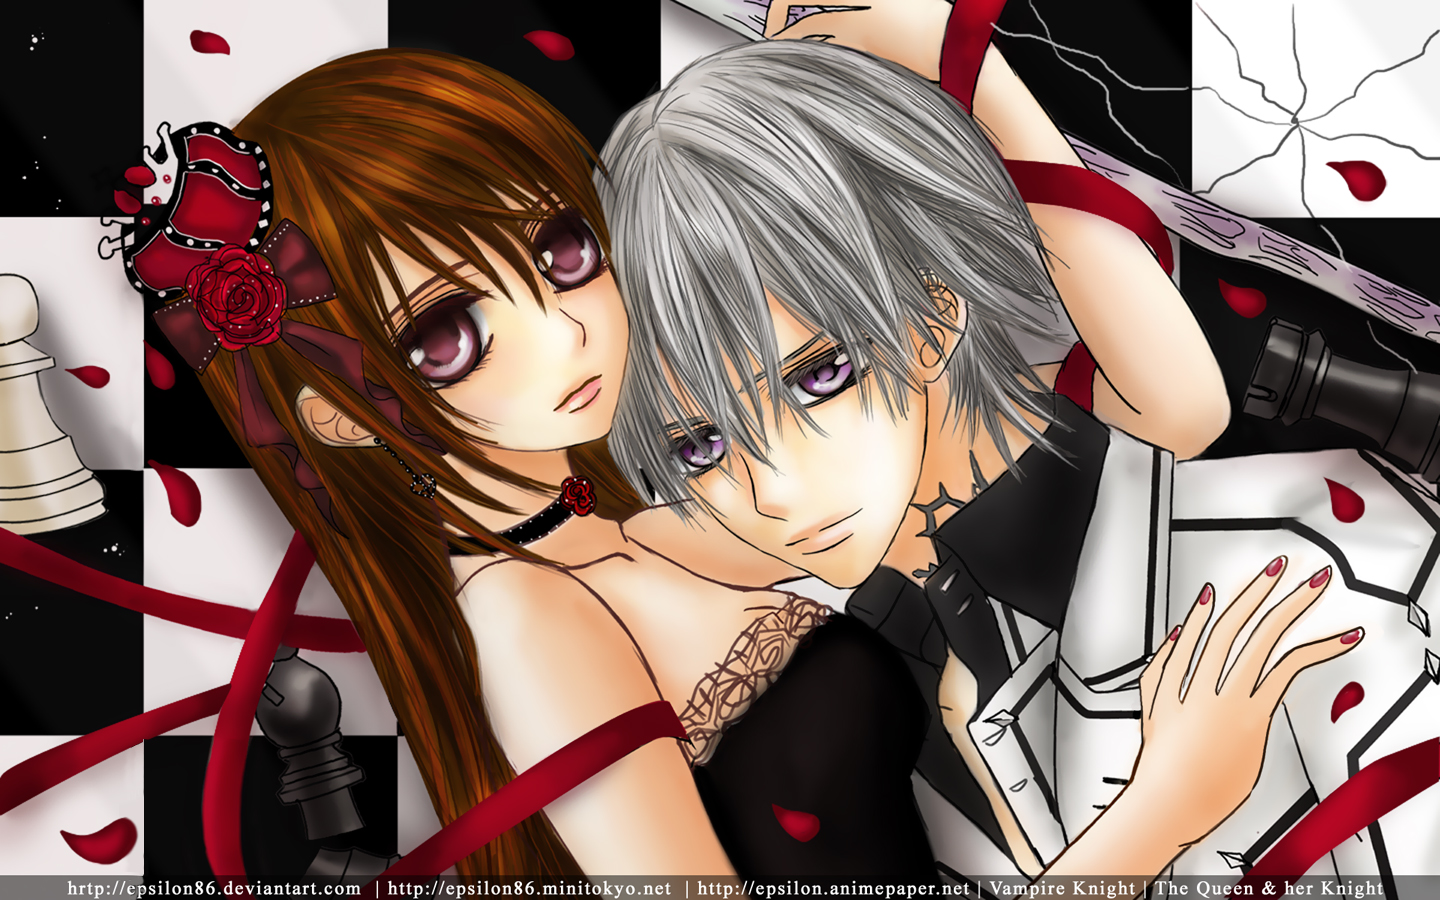 Vampire Knight - Images Colection